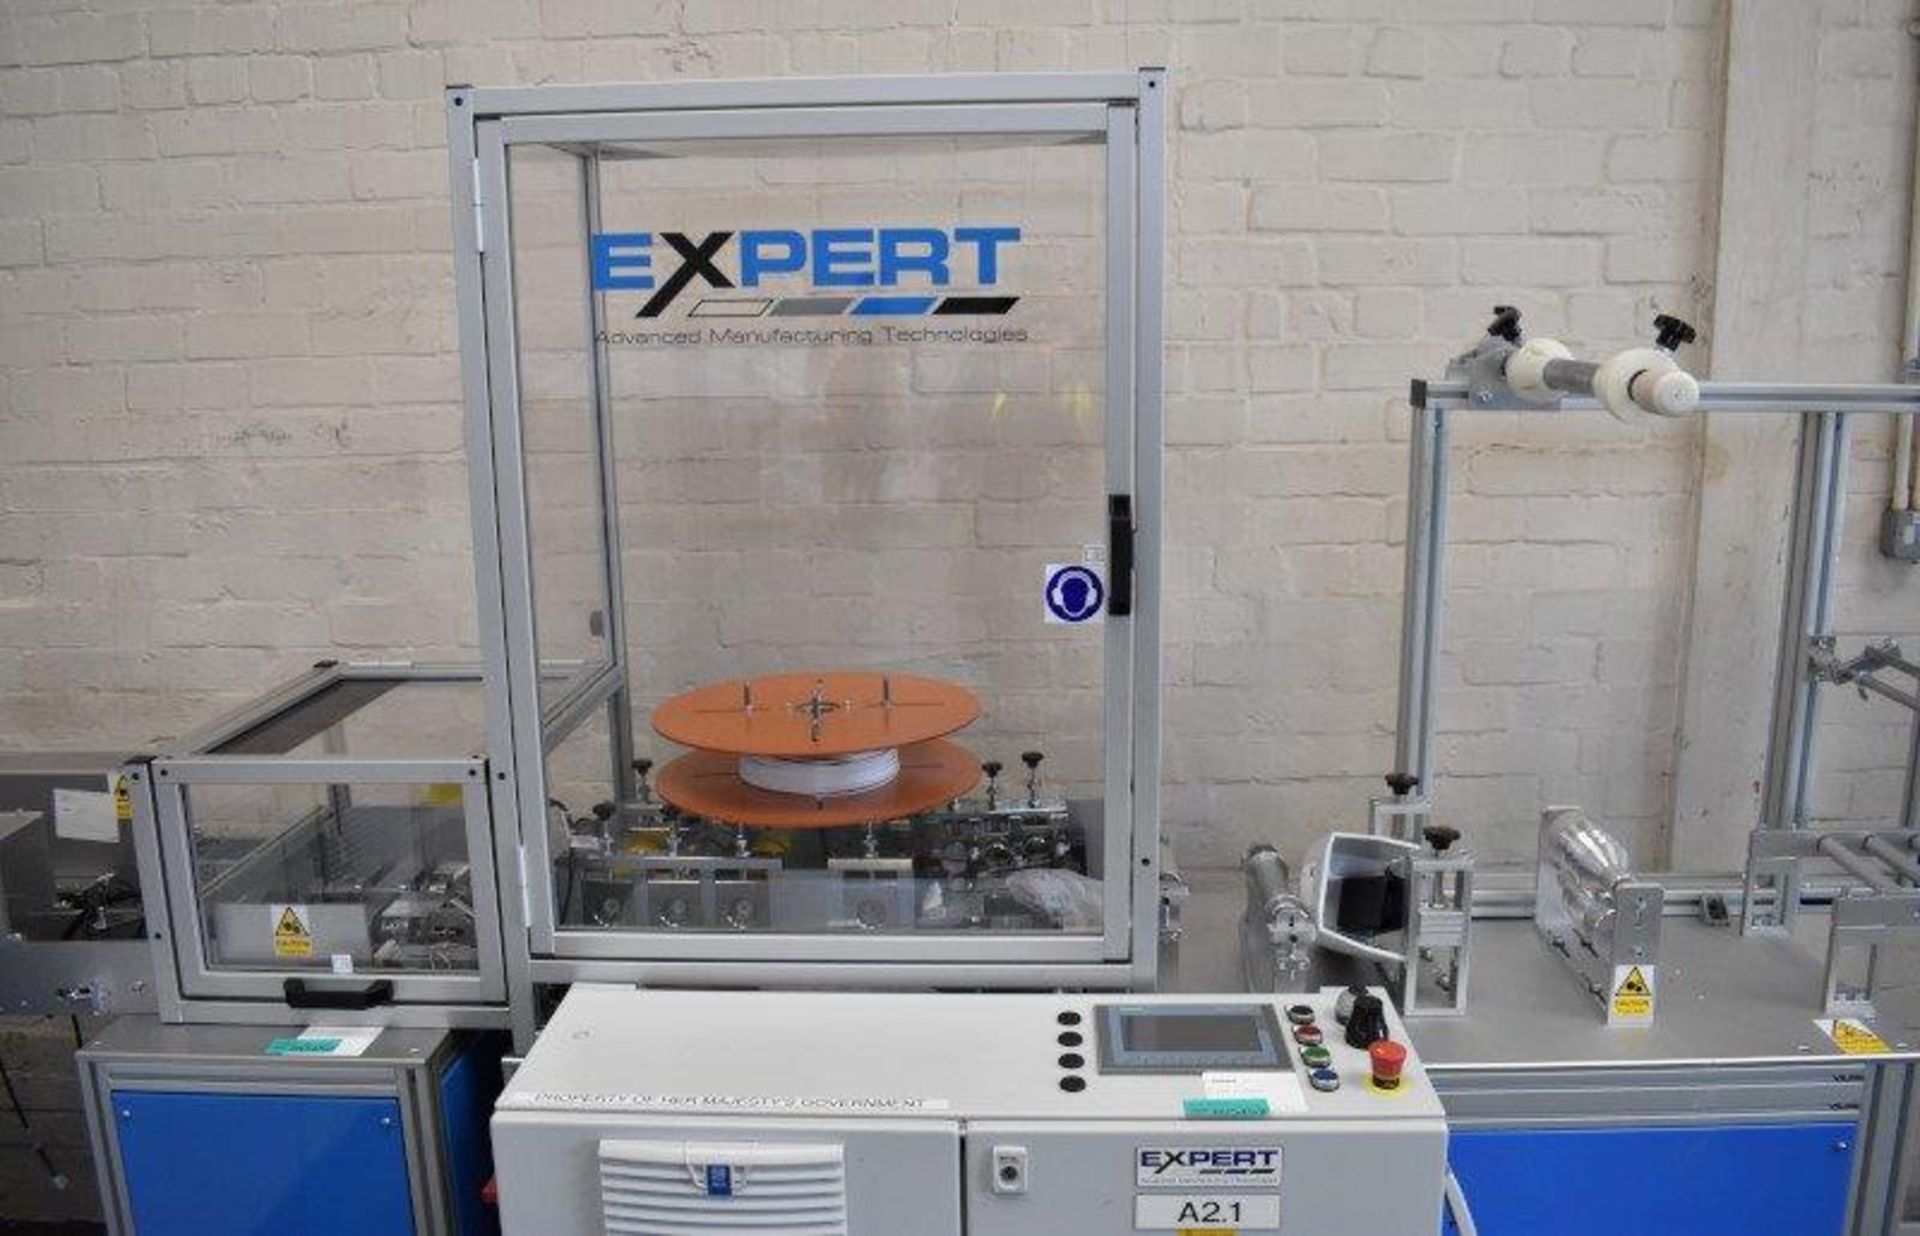 Expert fully automated Mask Making Machine - manufactured in 2020. - Image 5 of 20